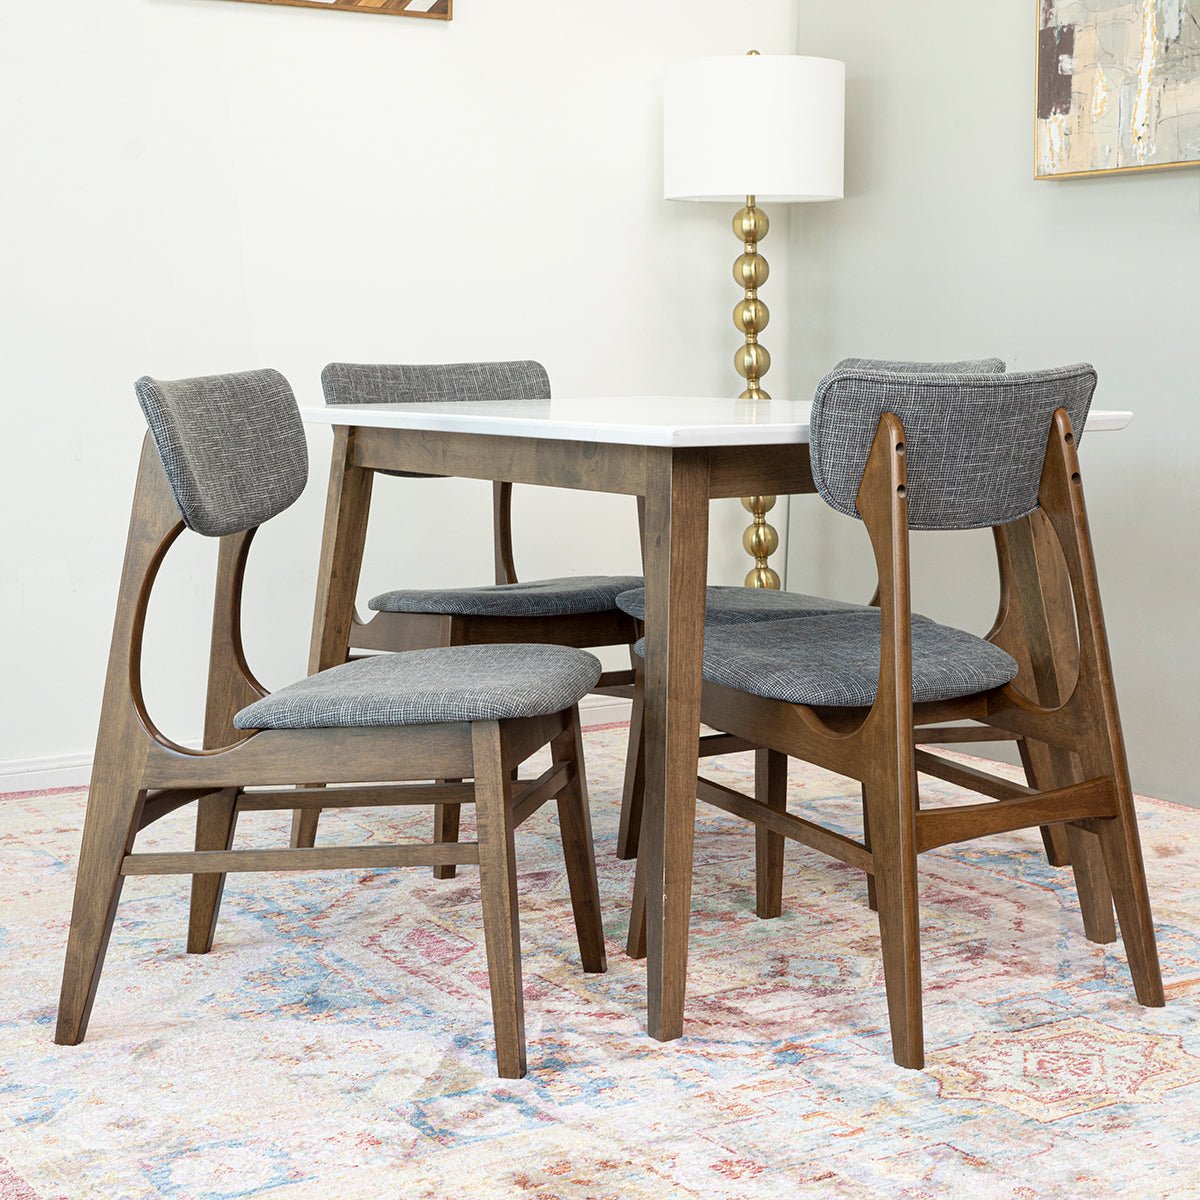 Dining Set , Alpine Small Table (White) with 4 Collins Chairs (Grey) | Mid in Mod | Houston TX | Best Furniture stores in Houston